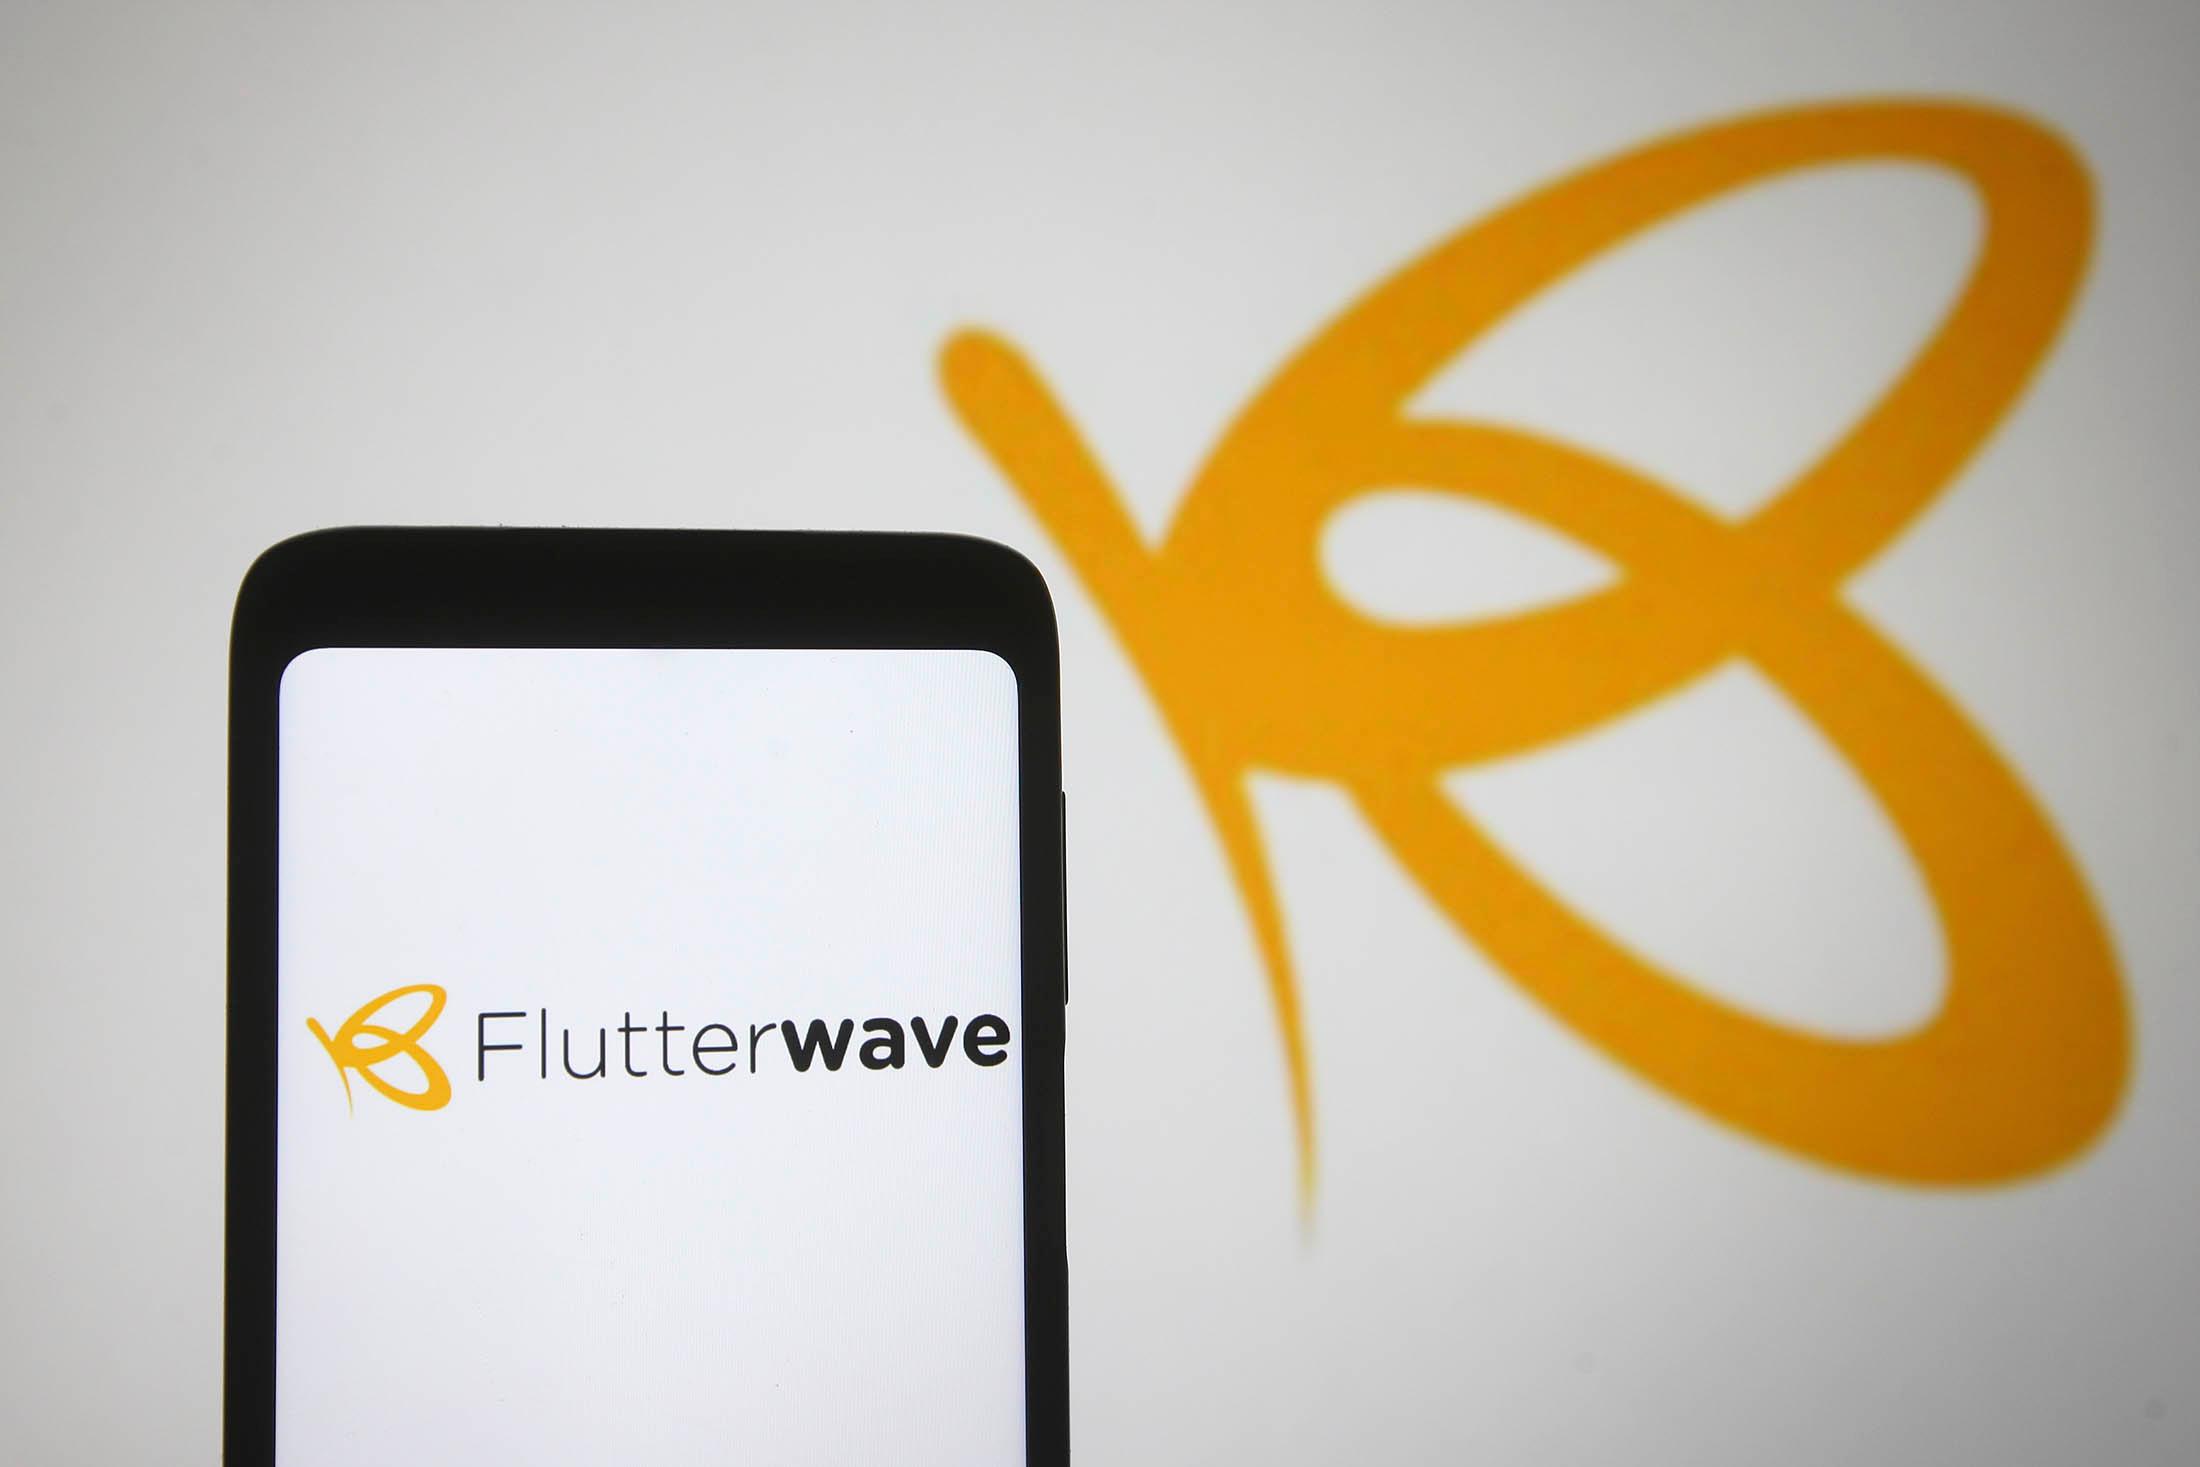 Blow for Flutterwave as Kenyan court declines request to withdraw case